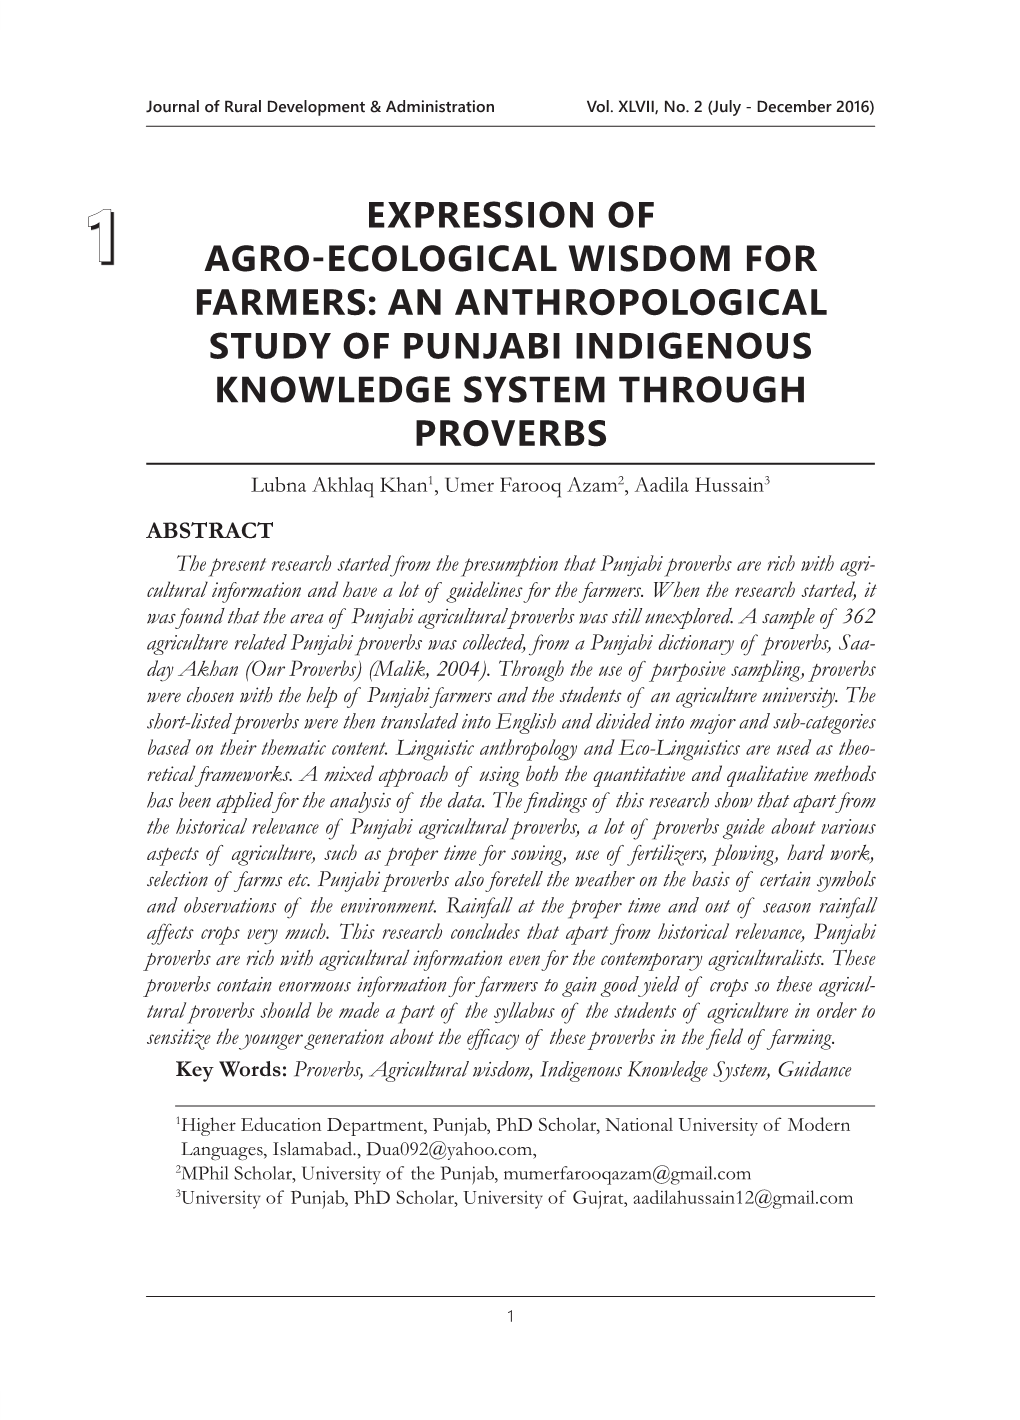 Expression of Agro-Ecological